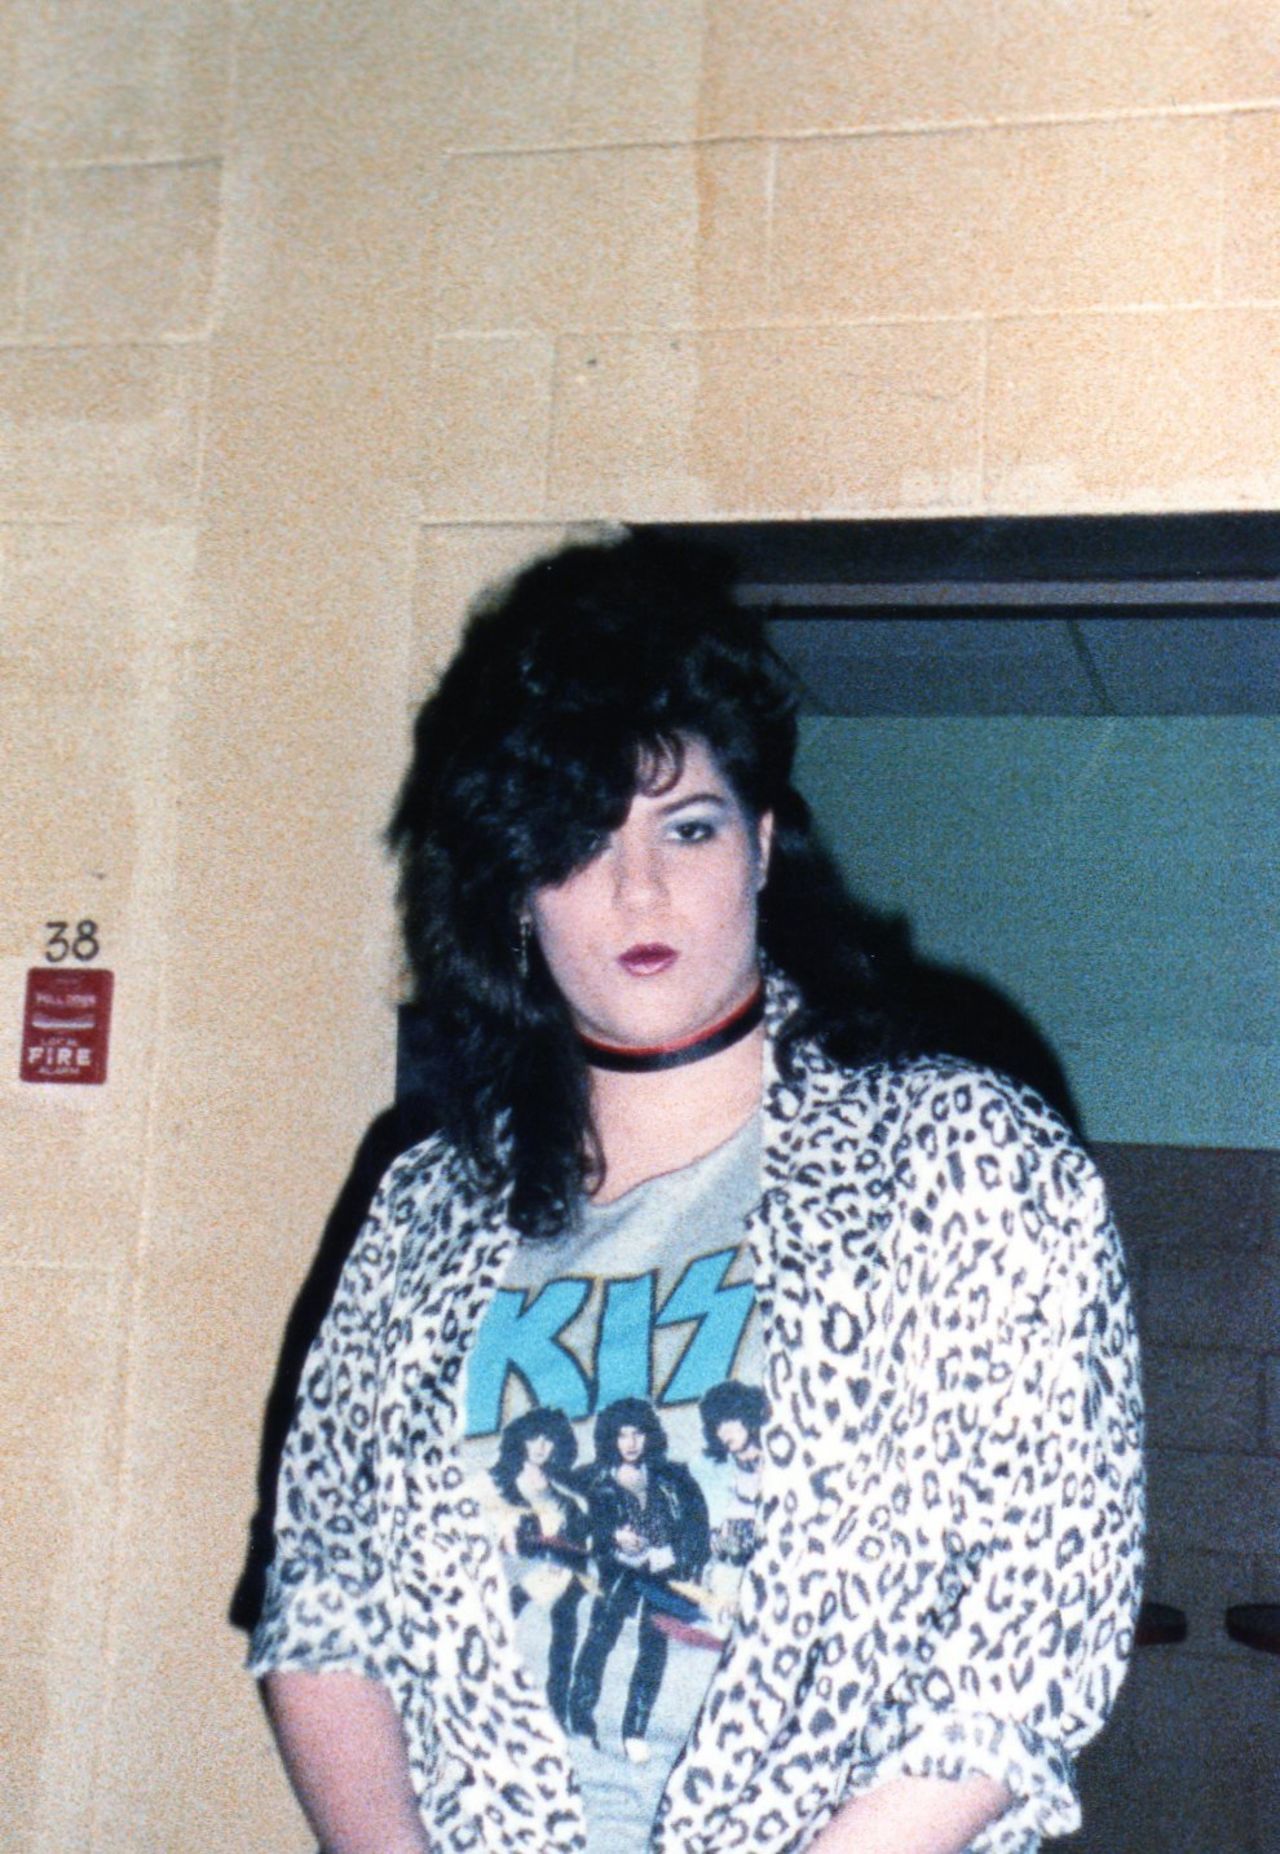 <a href="http://ireport.cnn.com/docs/DOC-1030707">Heavy metal music</a> helped T. Ray Verteramo find her own voice as a teenager living in Pougkeepsie, New York, in 1985. She had a front row seat to the crusade by the so-called moral majority that was convinced the bands she loved corrupted her generation's souls. Frank Zappa went on "Crossfire" that year to talk about it. 